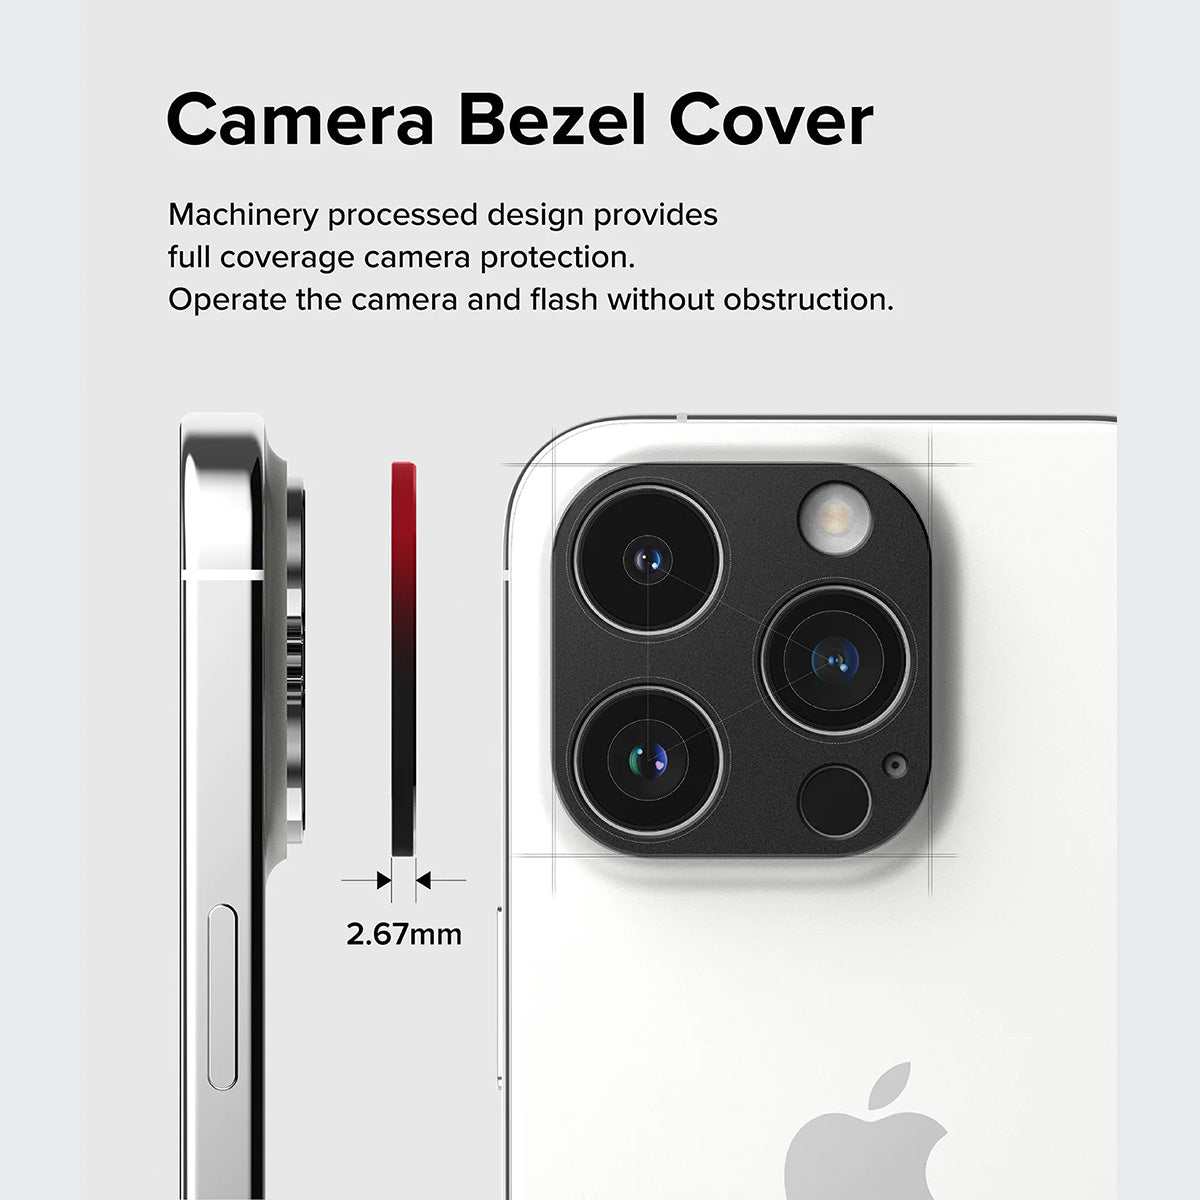 Ringke Camera Styling for iPhone 15 Series